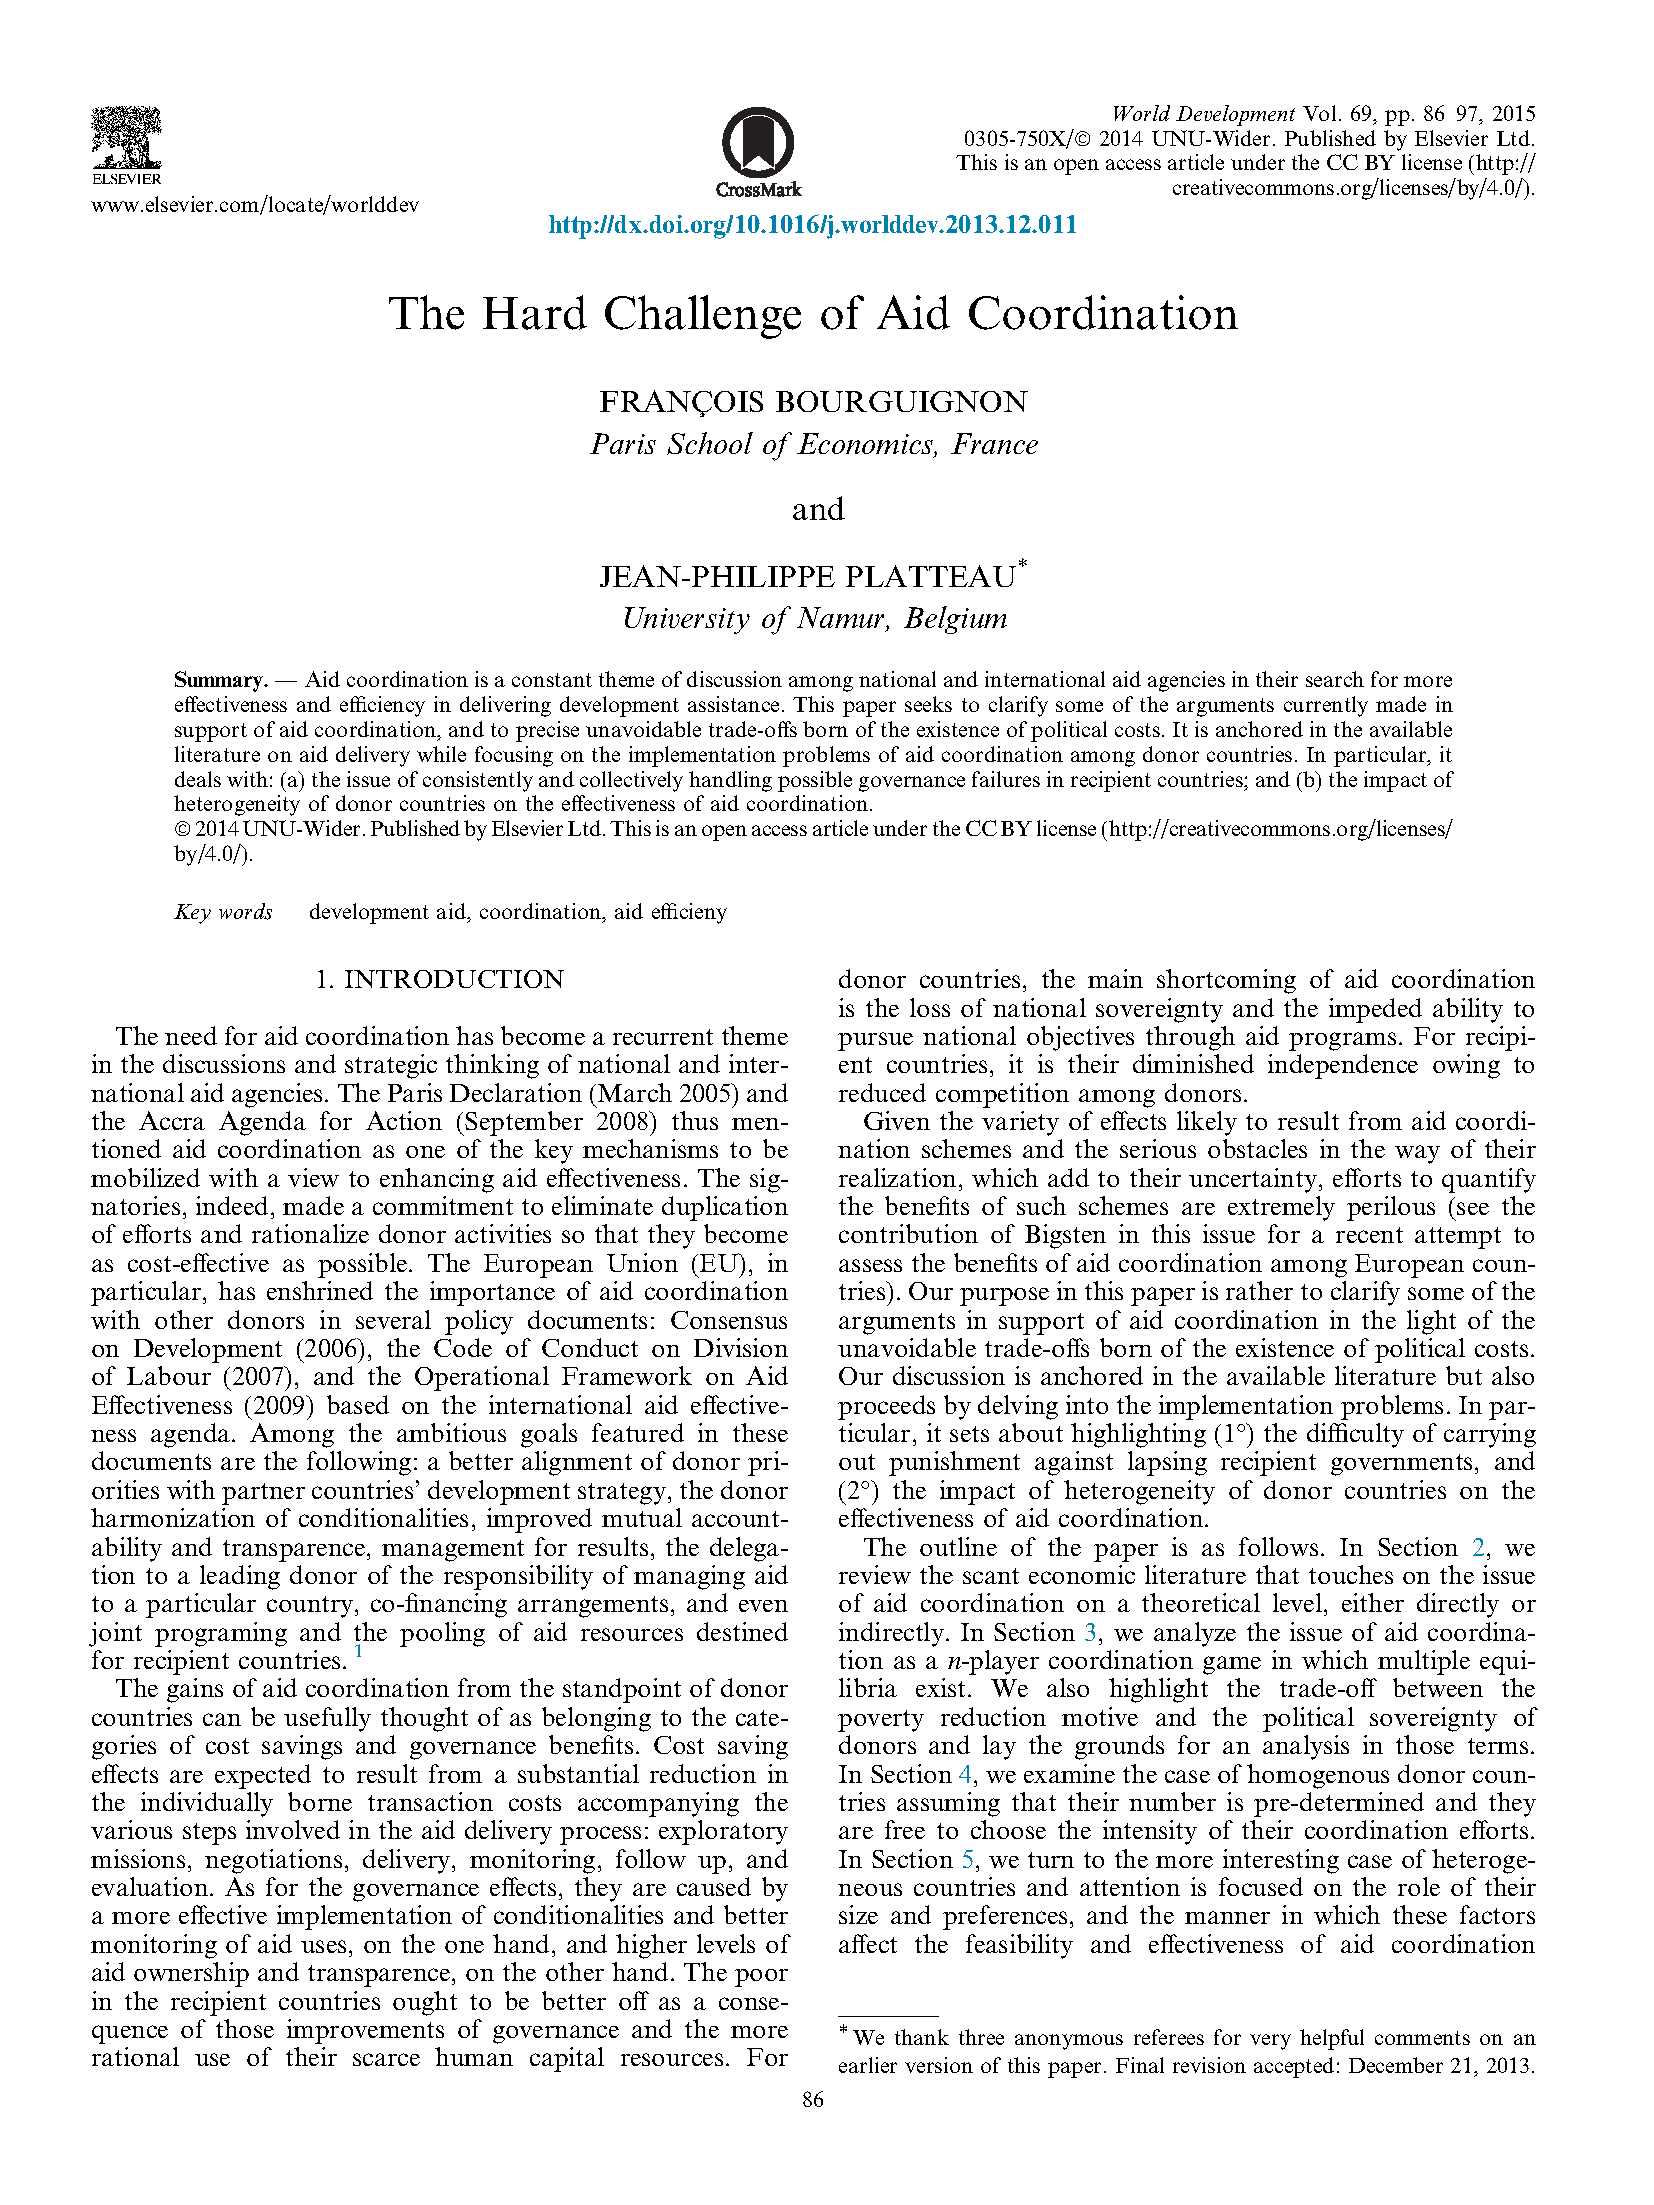 Cover page for The Hard Challenge of Aid Coordination